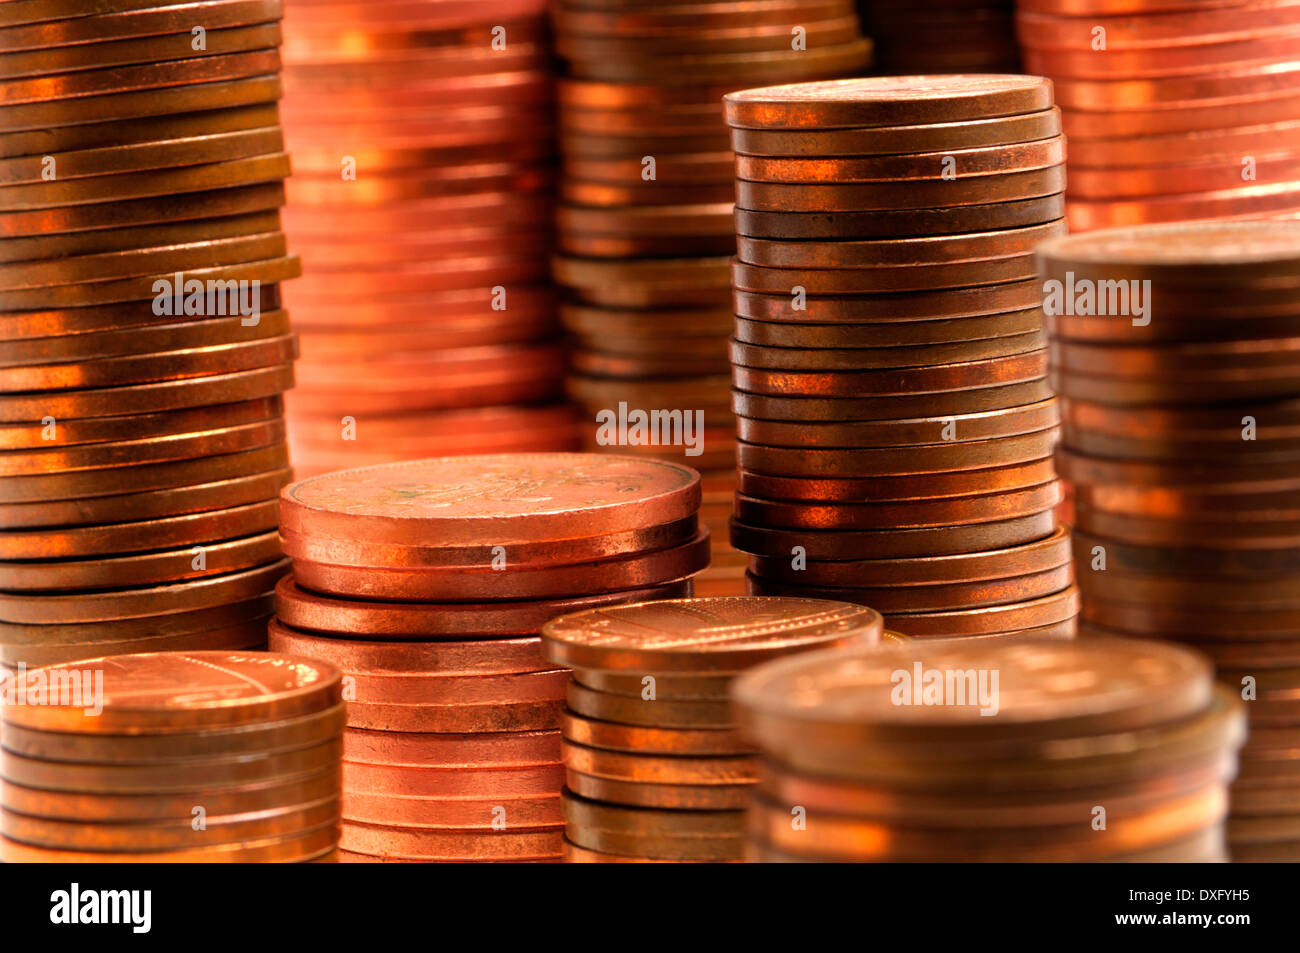 Piles of coins (British 1p and 2p) Stock Photo